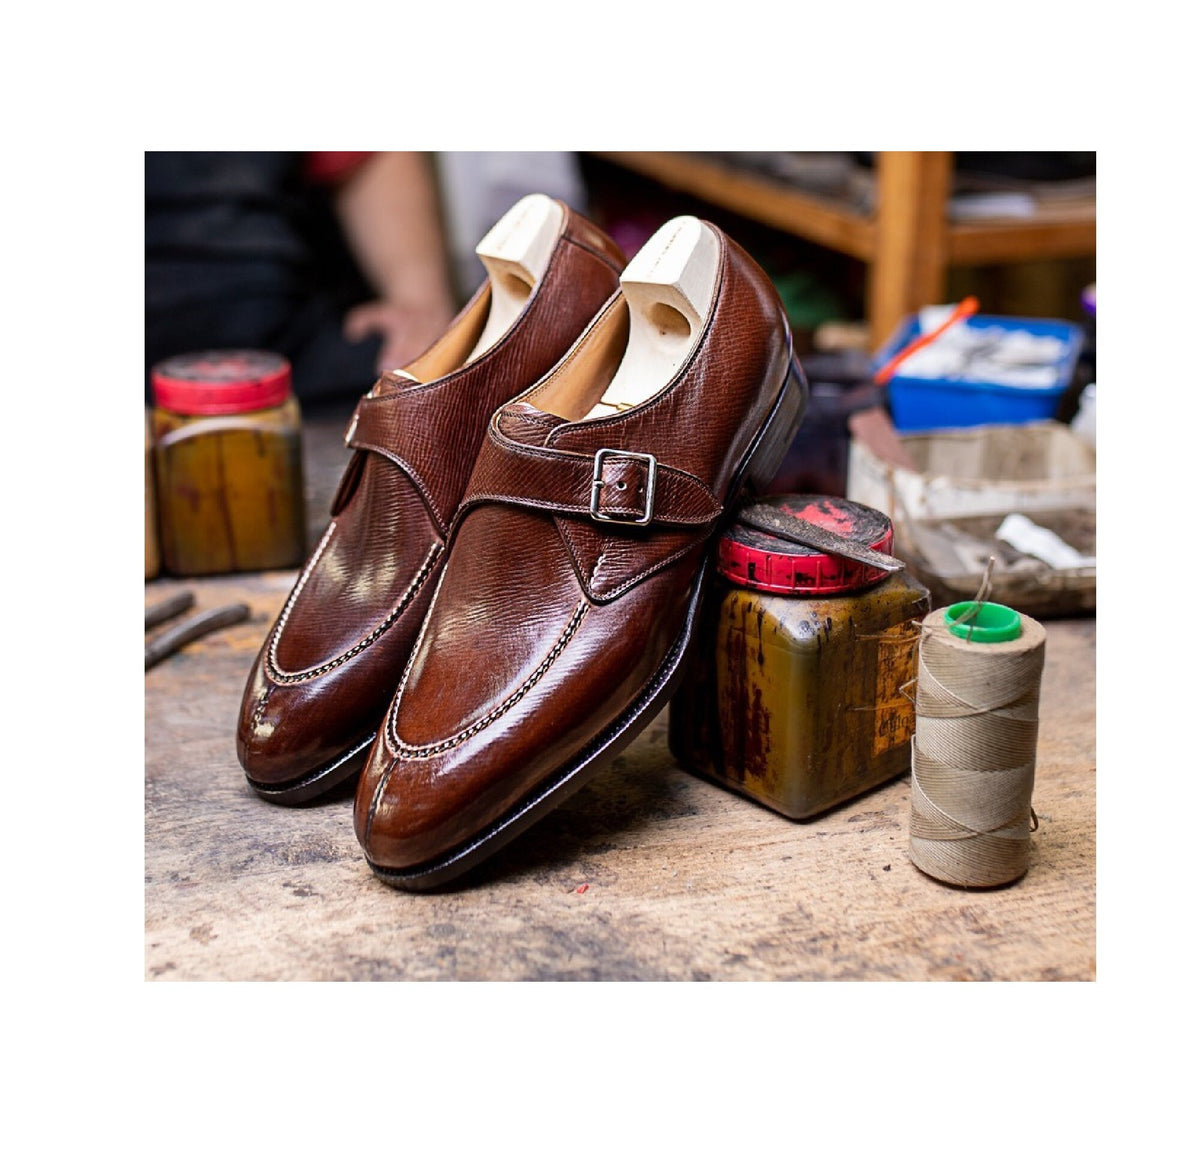 Brown Leather Single Monk Strap Shoes For Men, Handmade Leather Brown Monk Shoes, Gift for him, Men Shoes